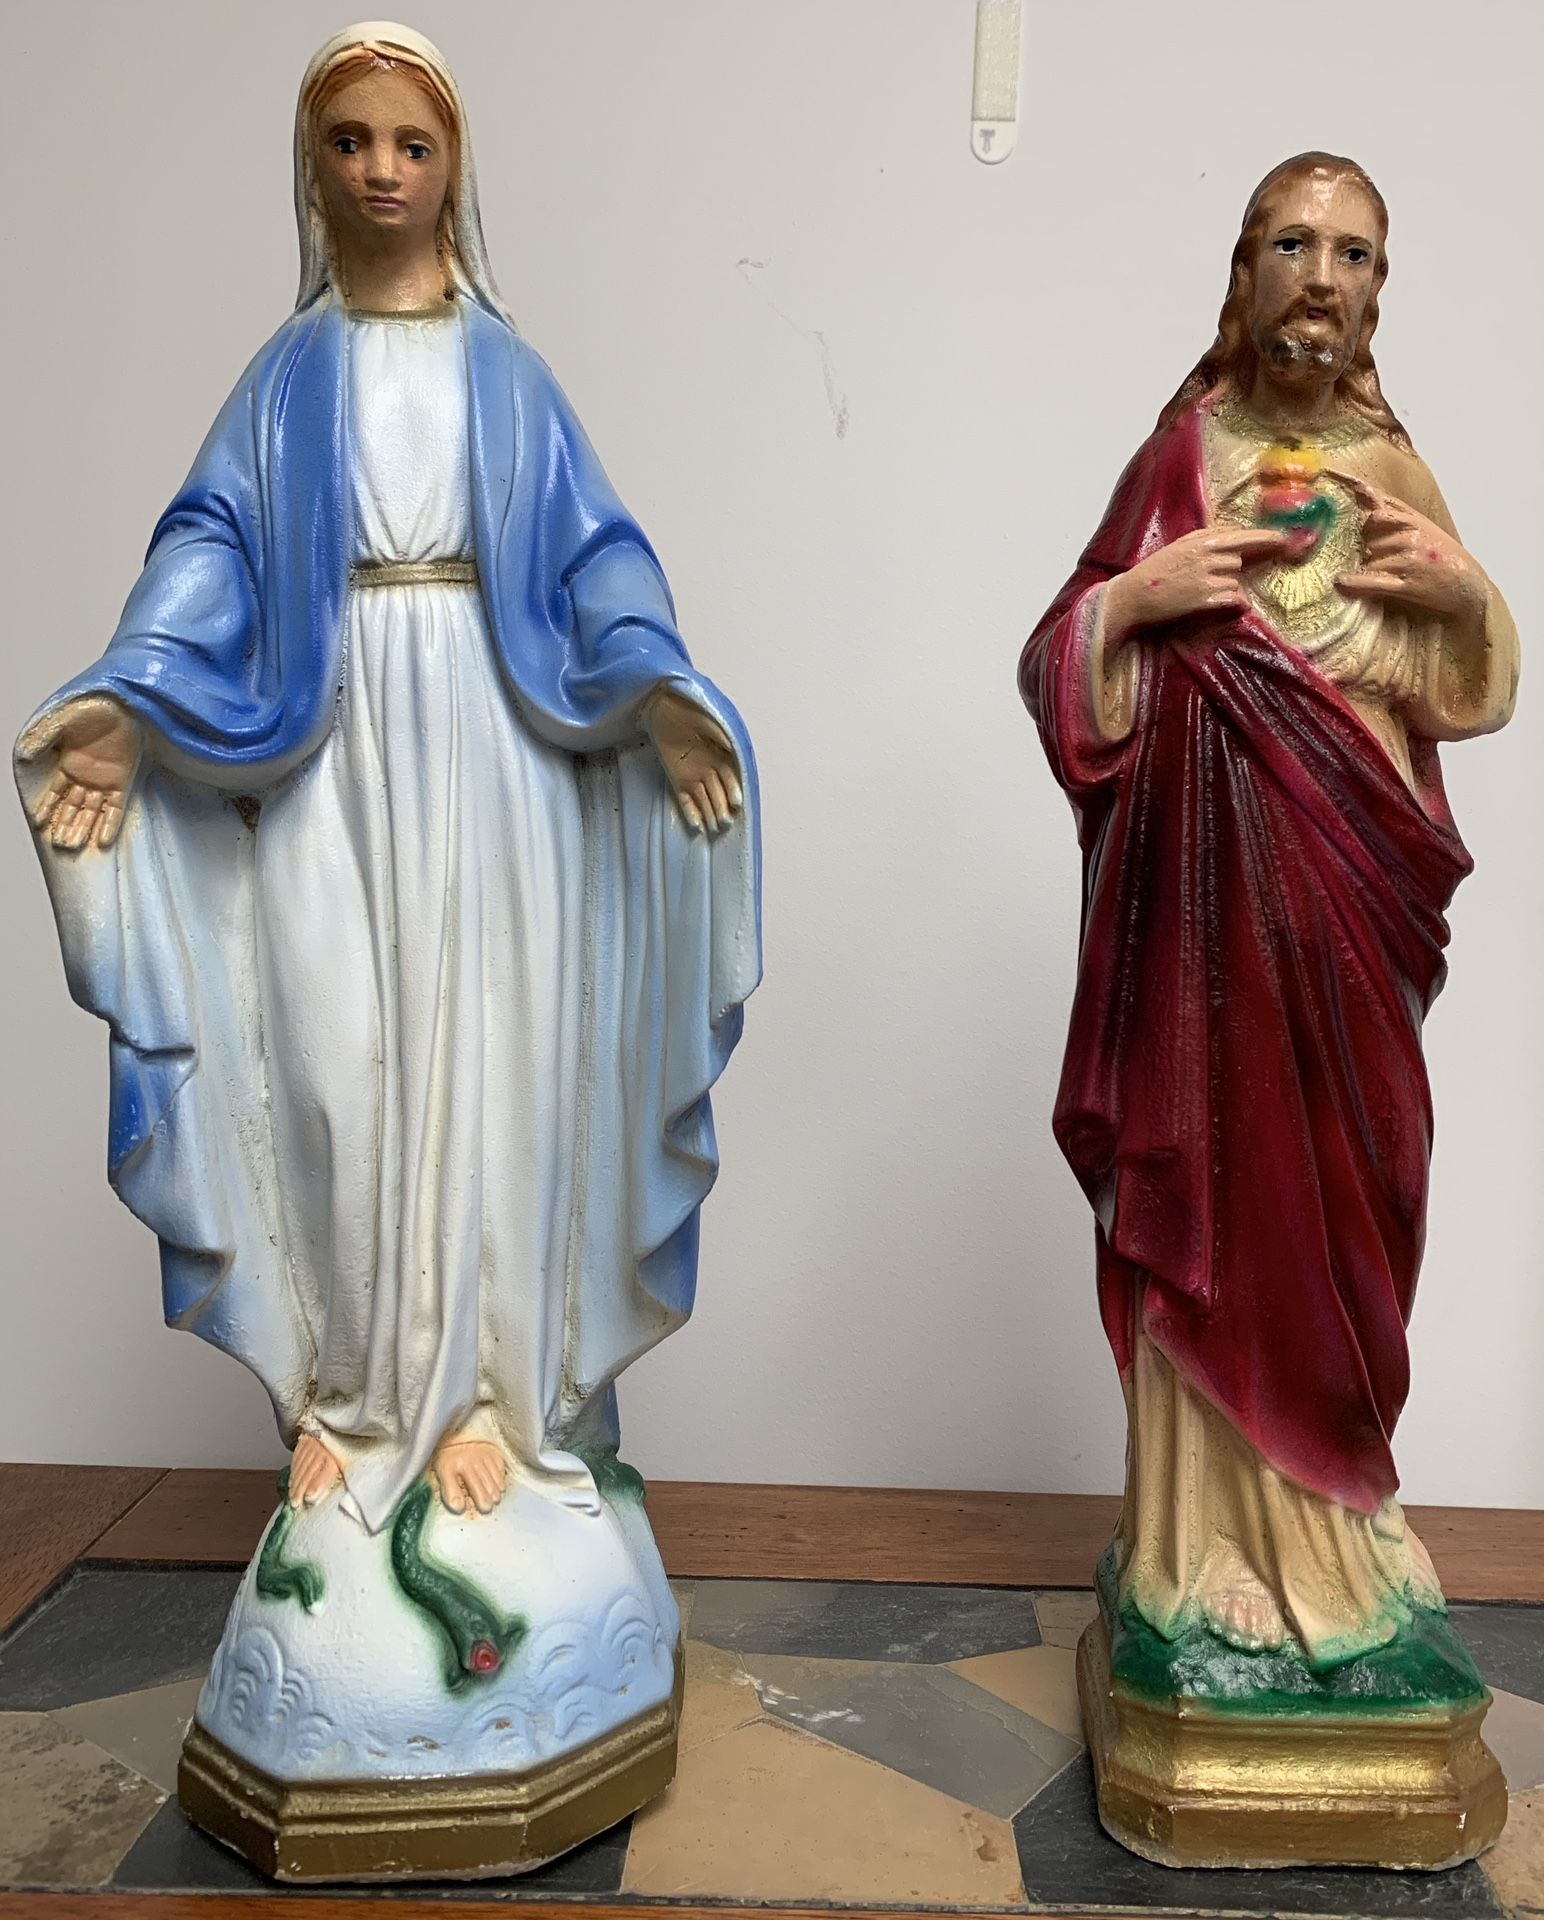 Vintage Chalkware Plaster Statue of Mary "Our Lady of Grace” and “Sacred Heart of Jesus” $15 each